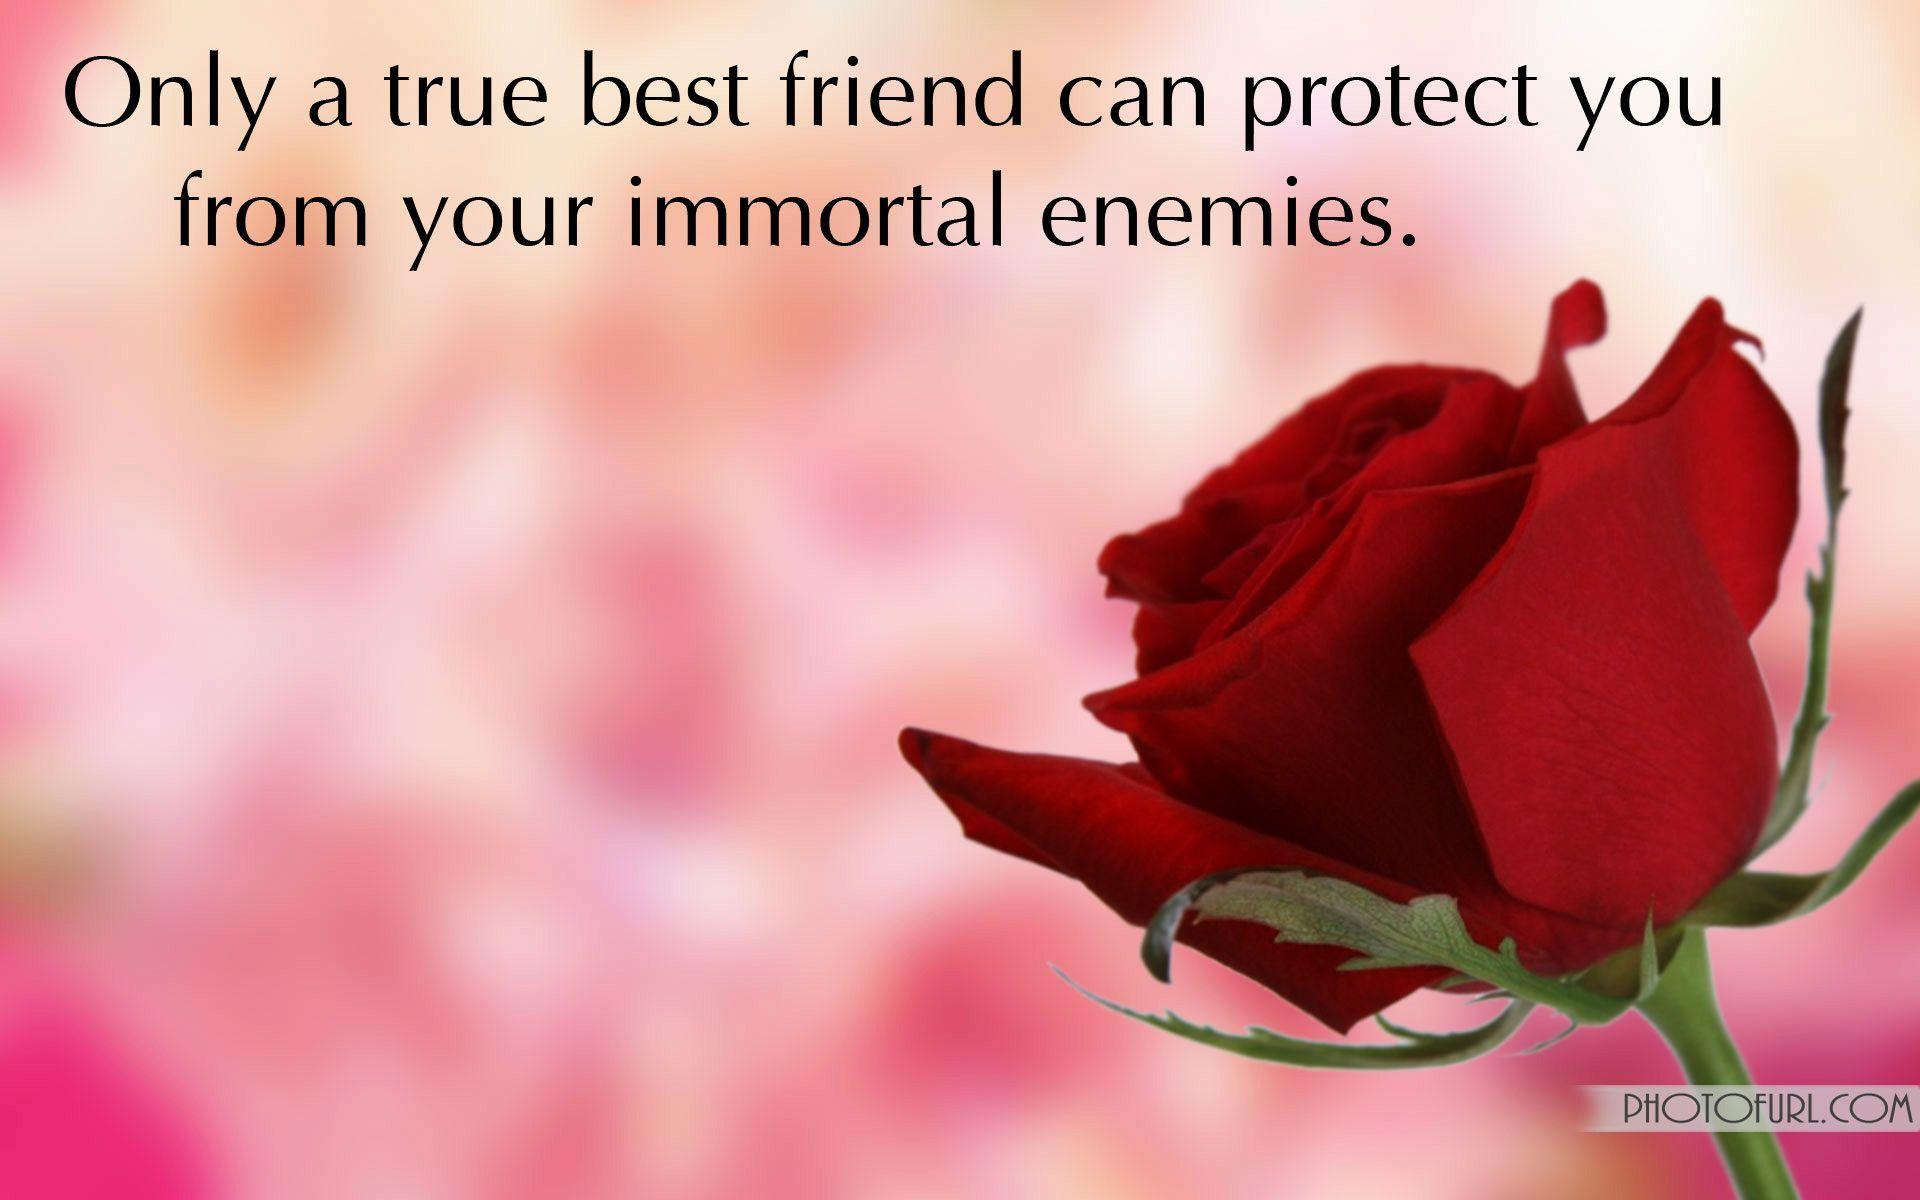 Friendship Wallpaper With Quotes. Free Wallpaper. Epic Car